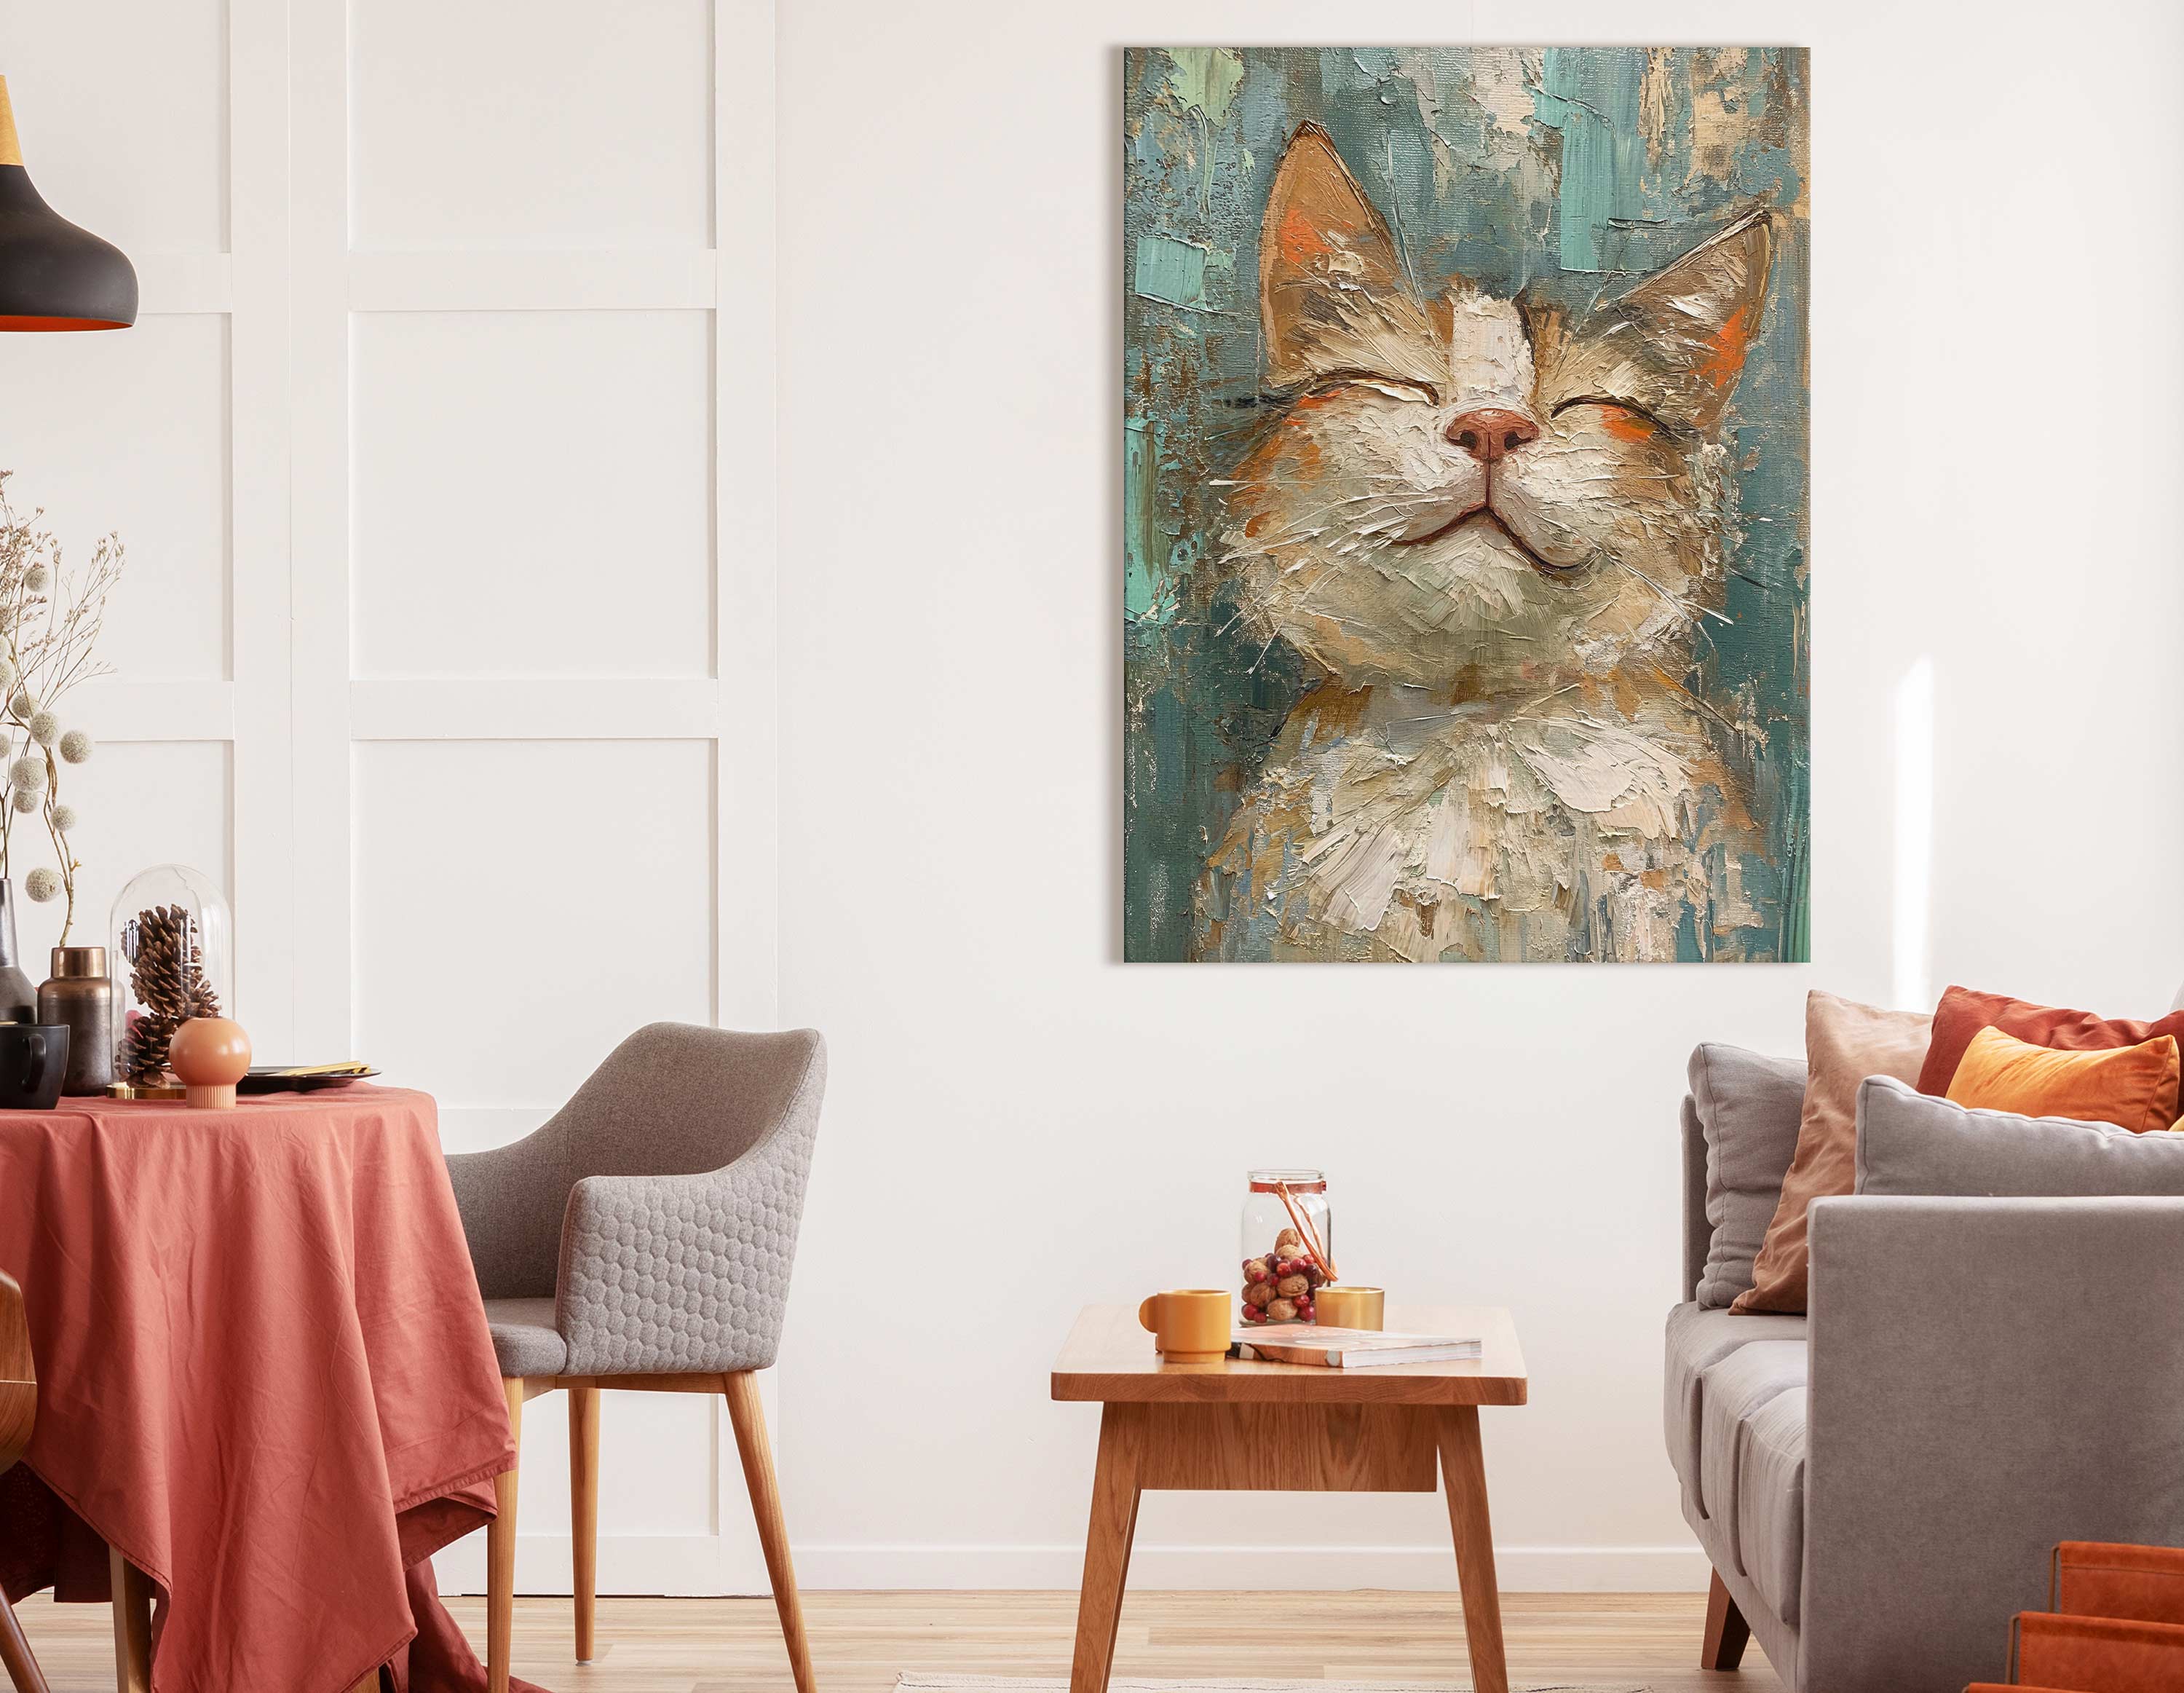    Whimsical Cat Wall Decor